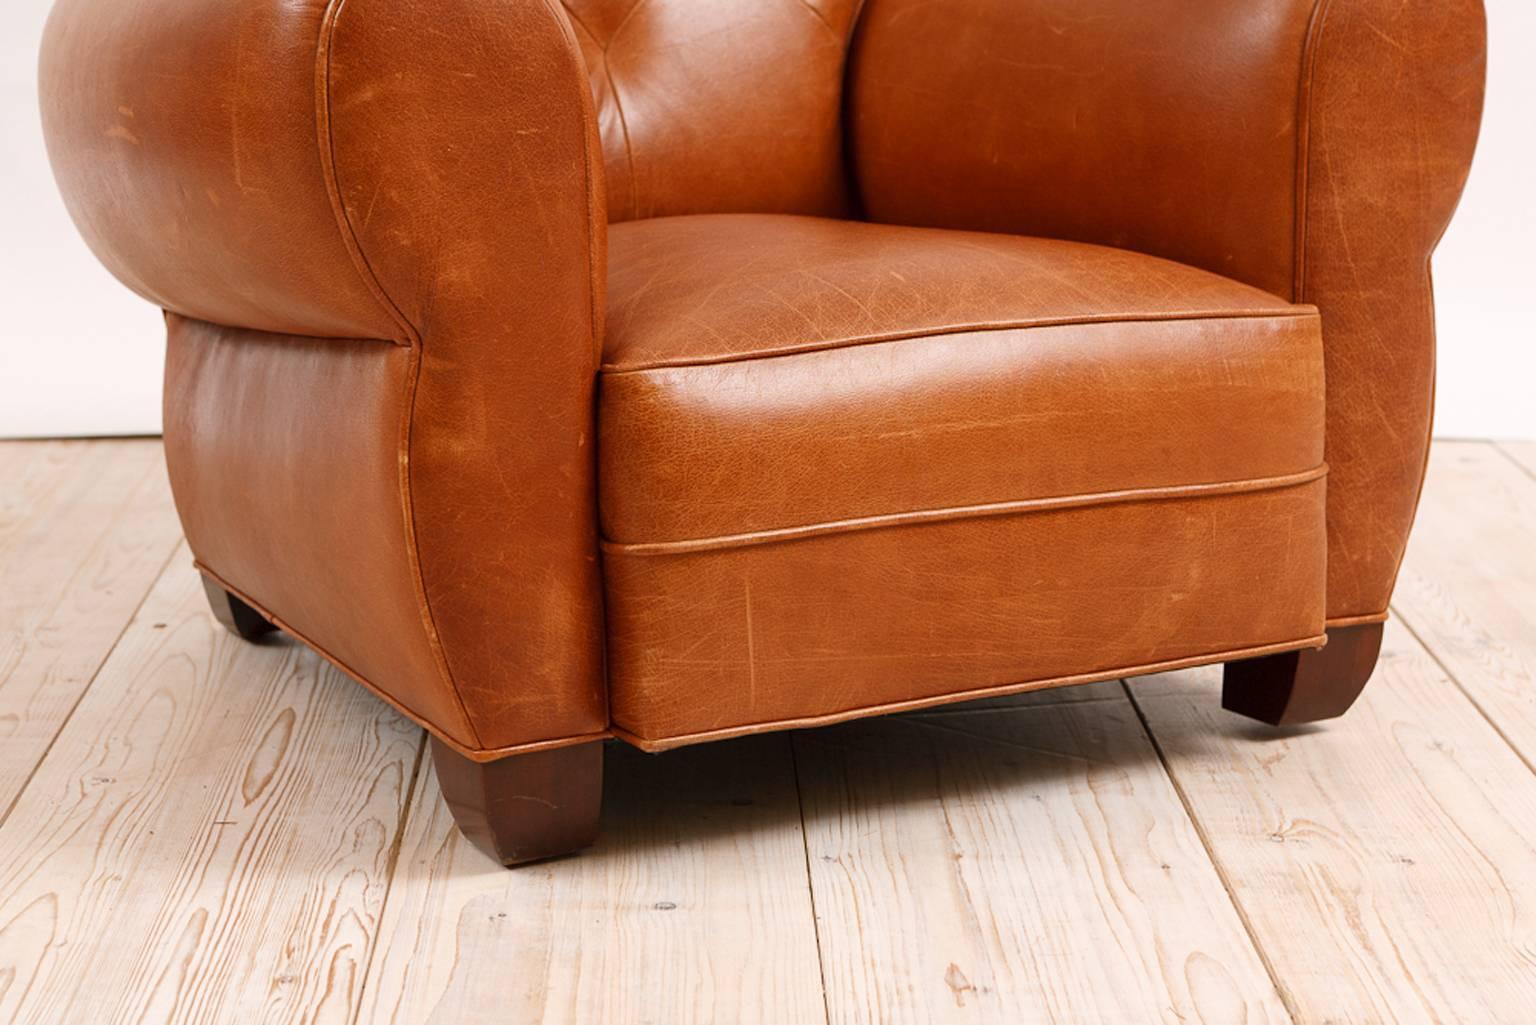 A very comfortable and beautifully-crafted, limited edition, large Art Deco-style club chair upholstered in a caramel-colored buffalo hide with tufted back, rounded arms and wooden club feet. Tight upholstered seat has eight-way-hand-tied spring